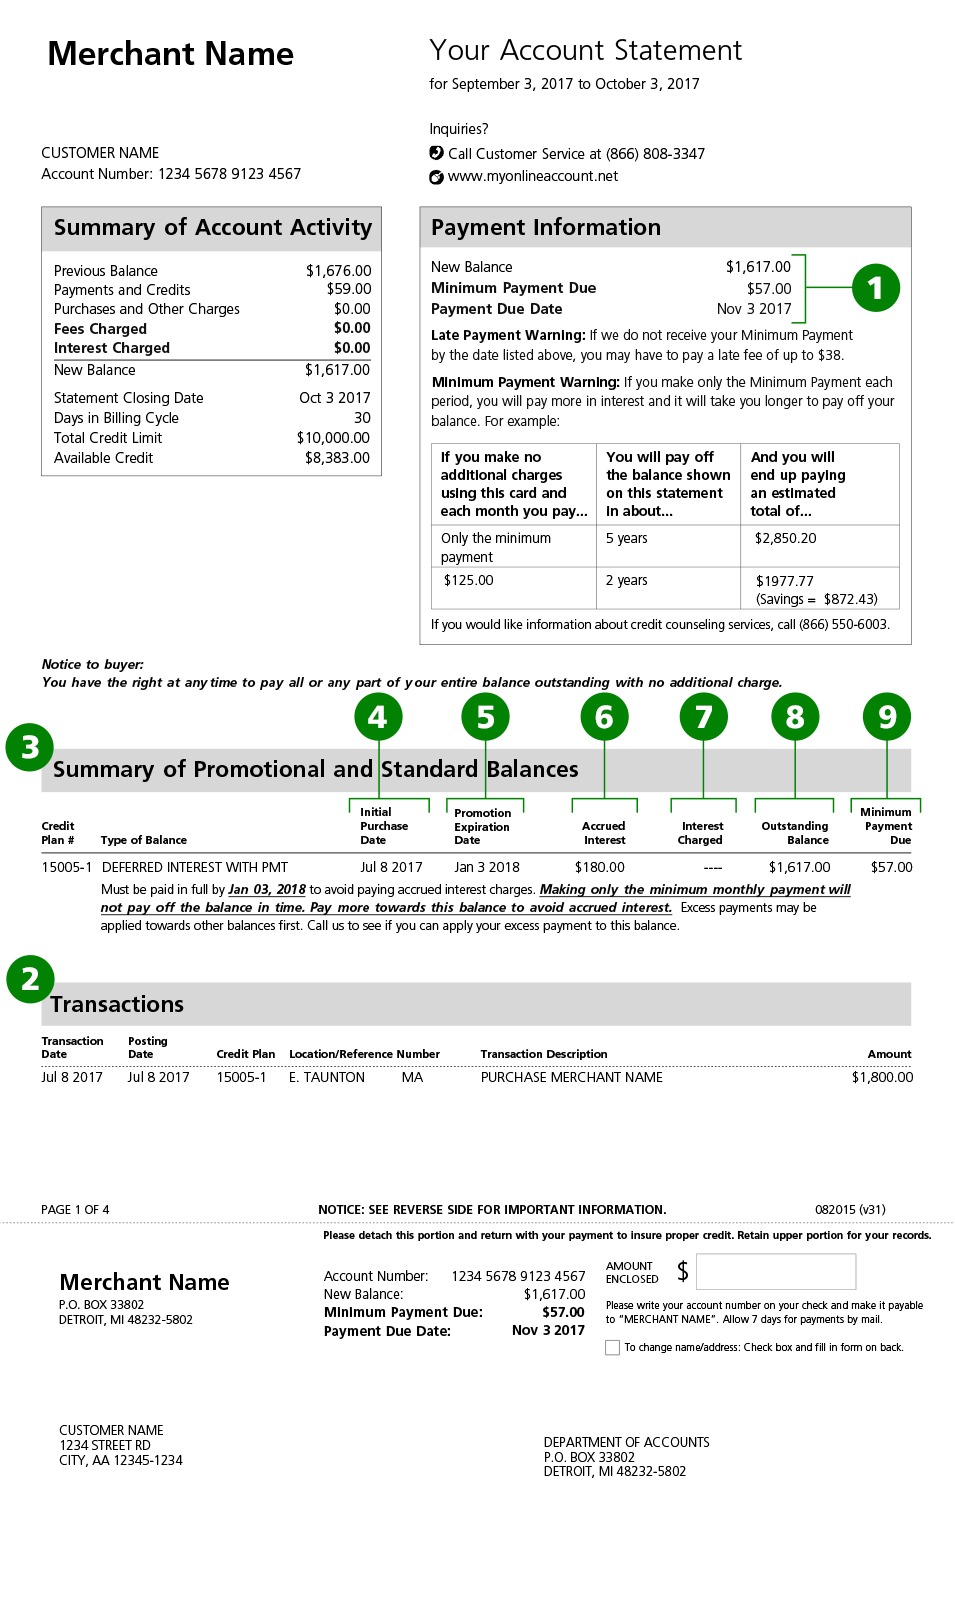 Account Statement Example – Page 1